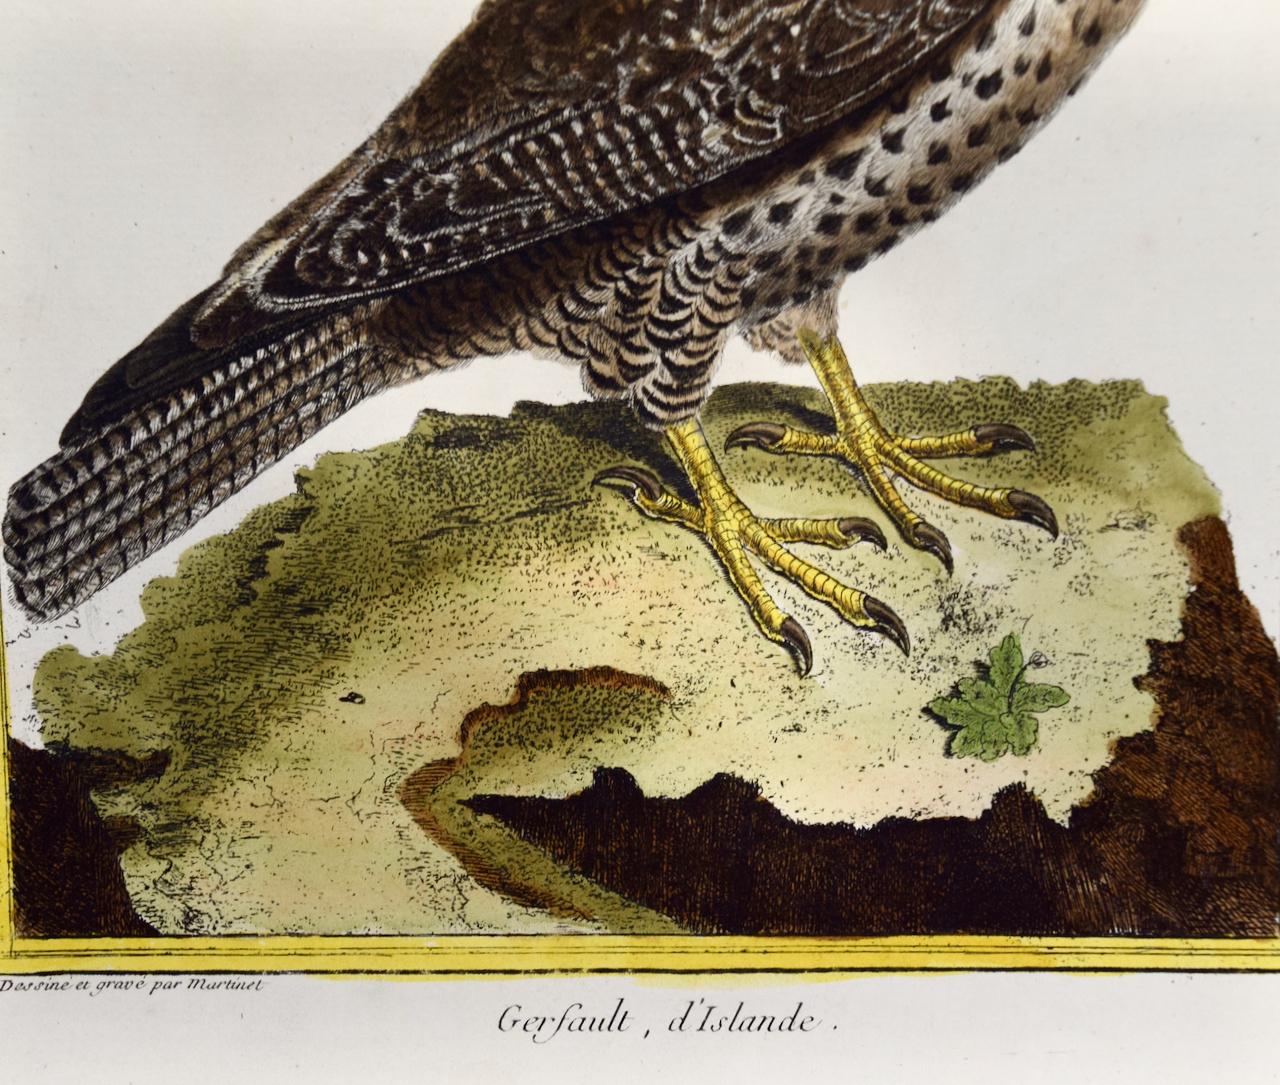 This is a hand-colored engraving of an Icelandic Ger Falcon entitled 